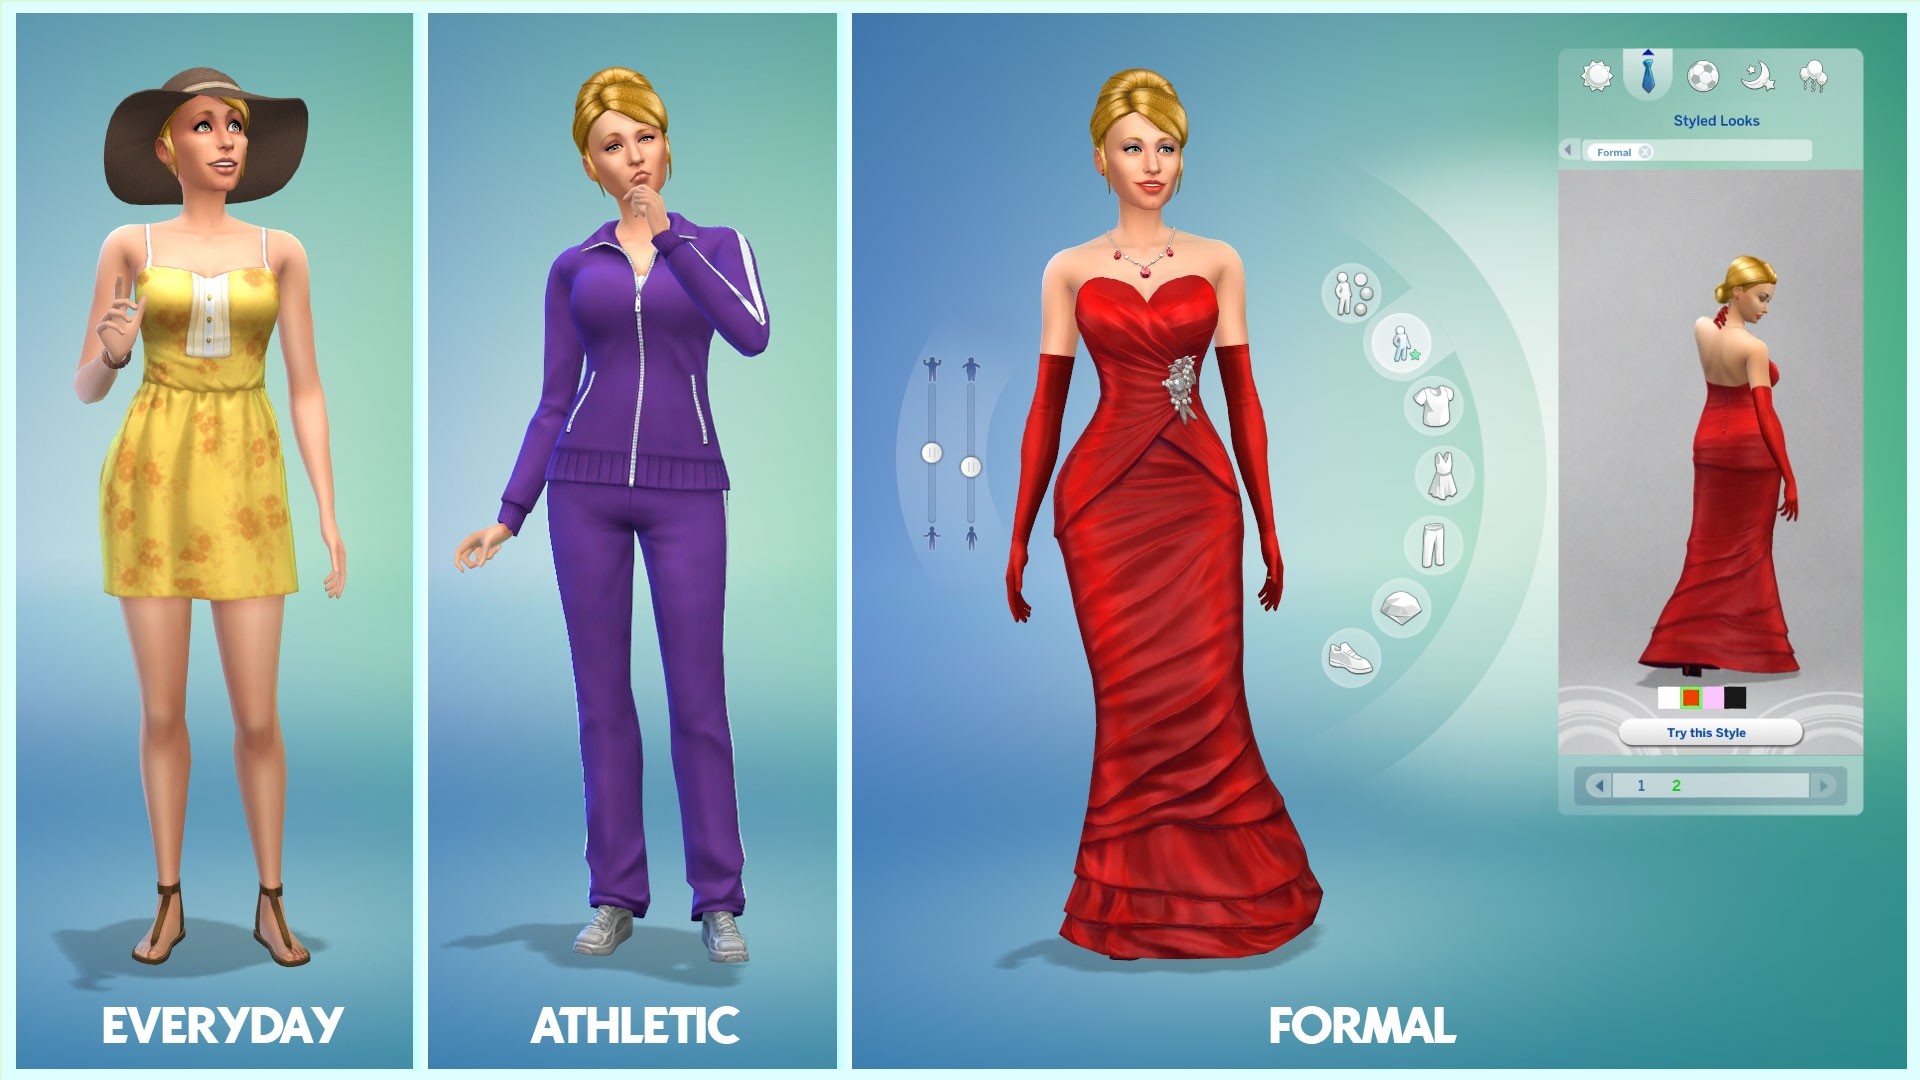 sims 4 free online game no download